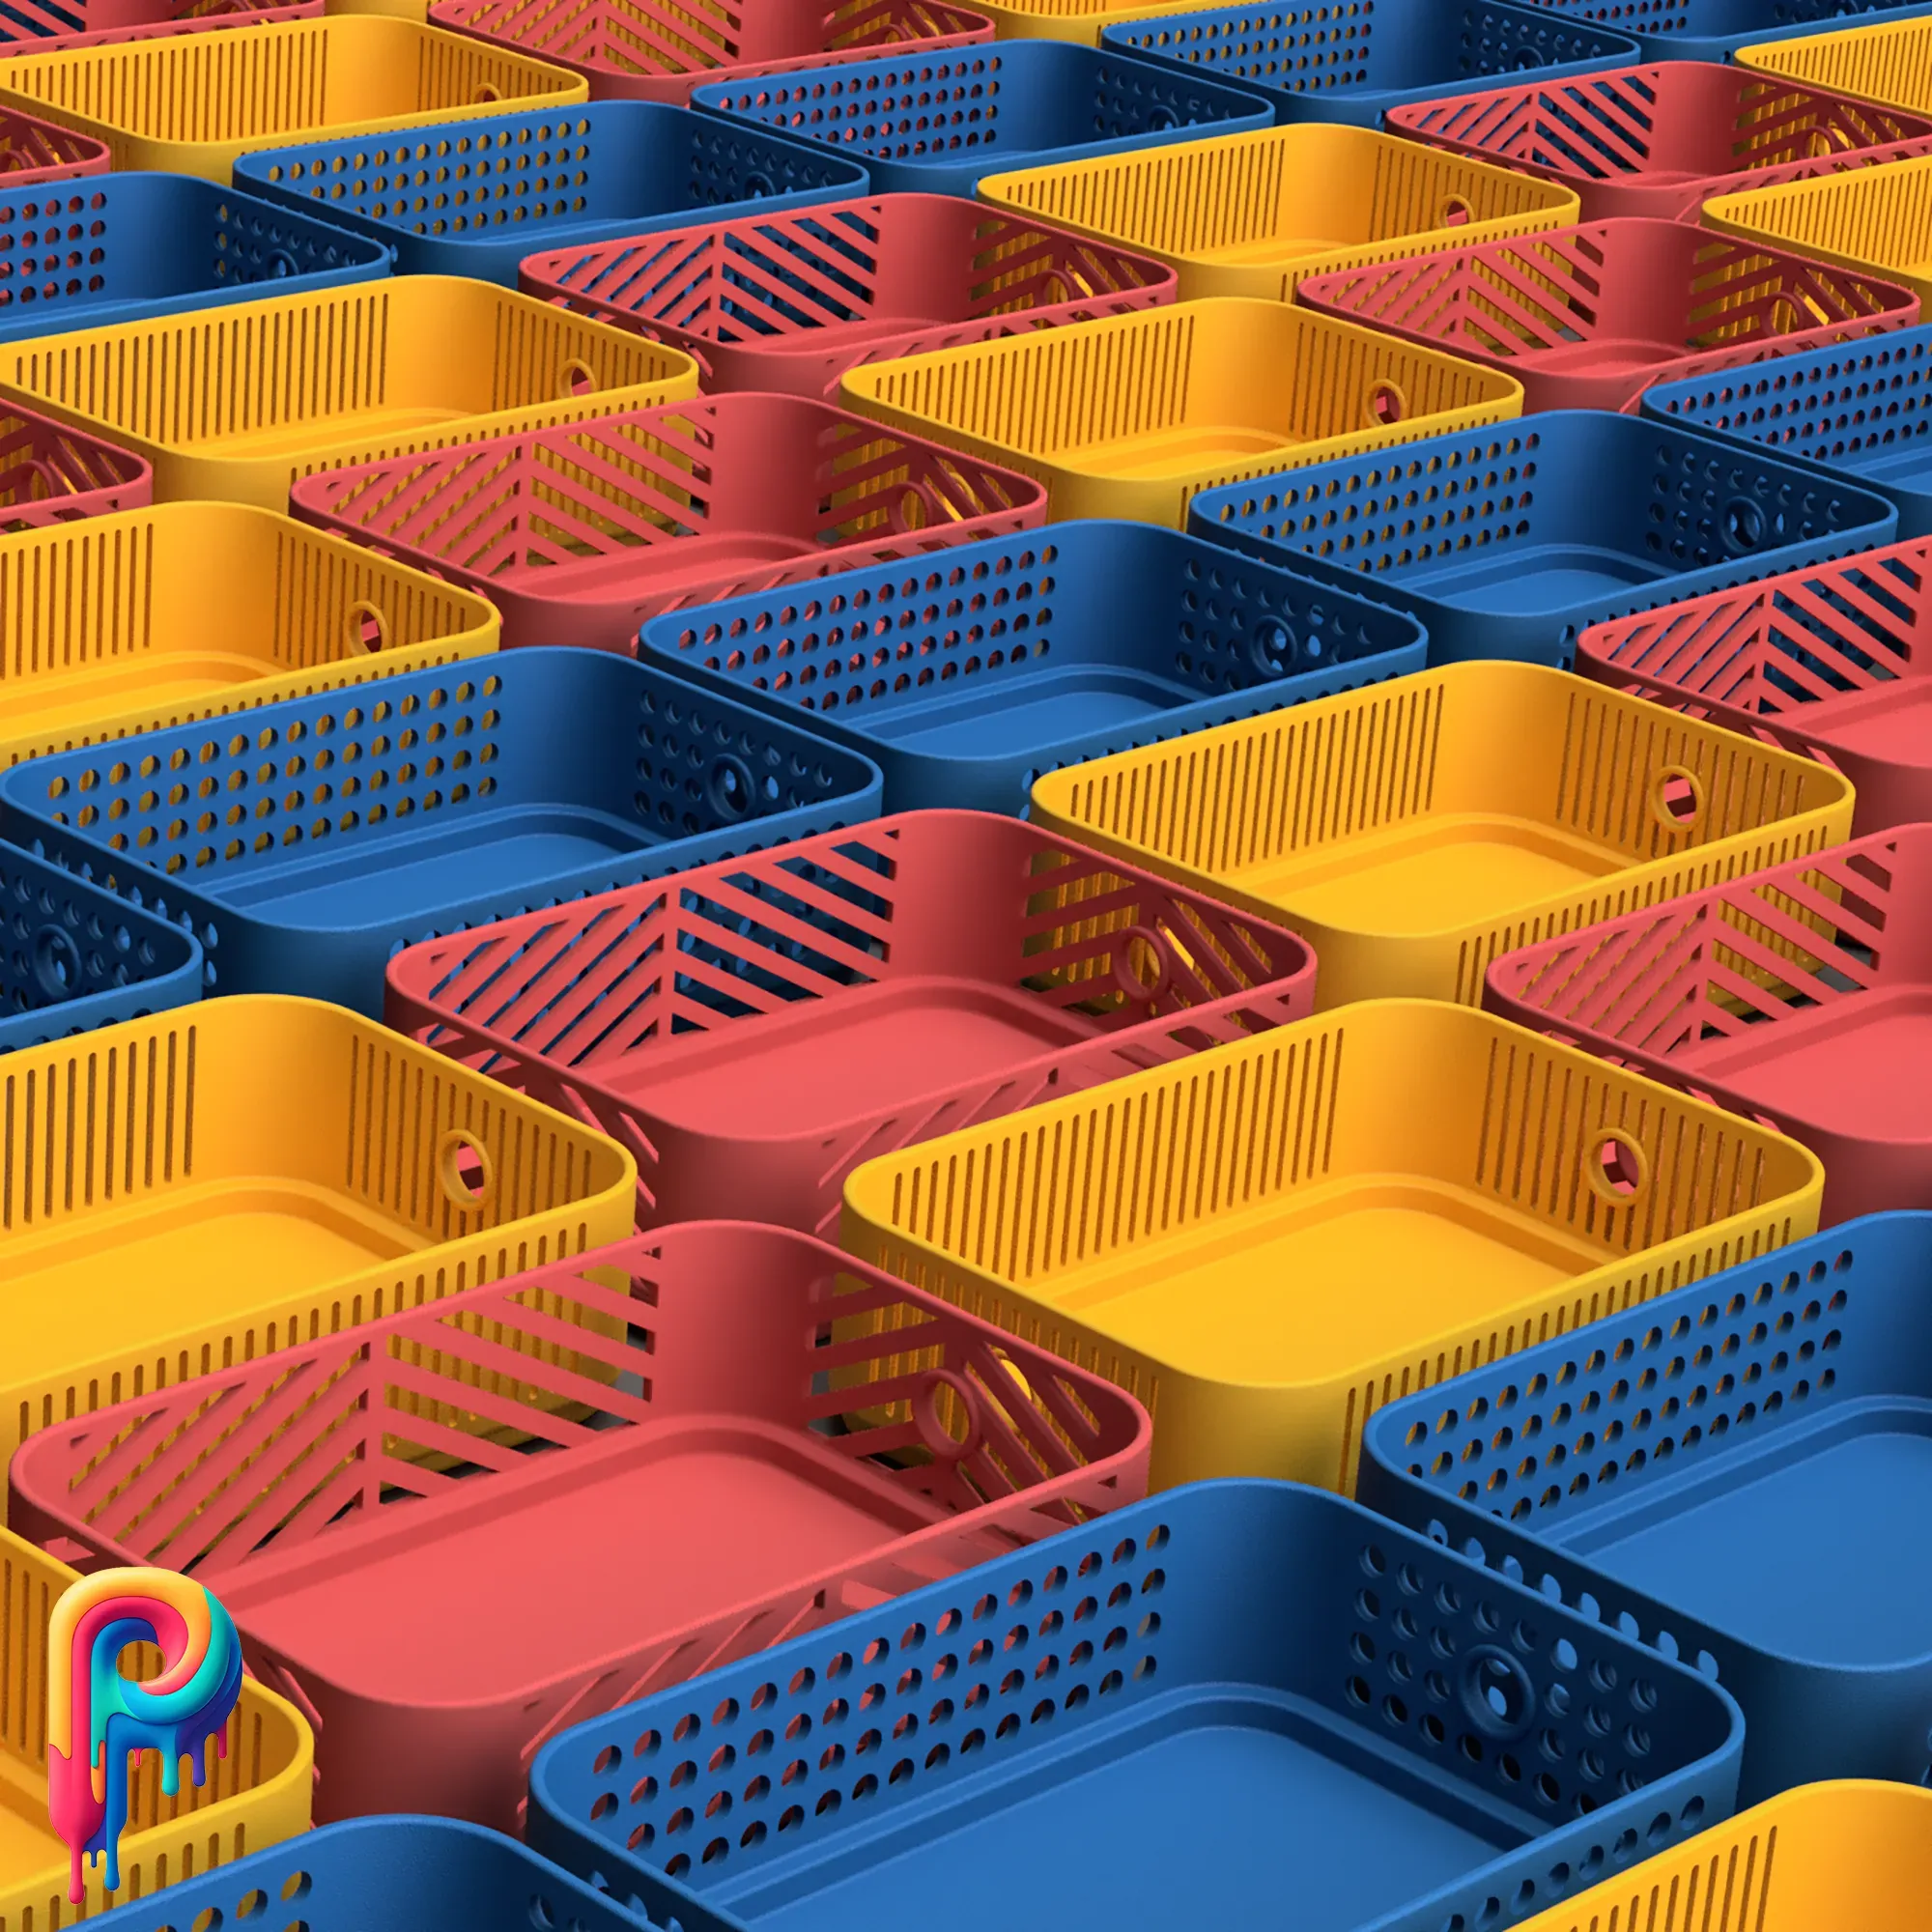 Stackable Crates by Polymeria